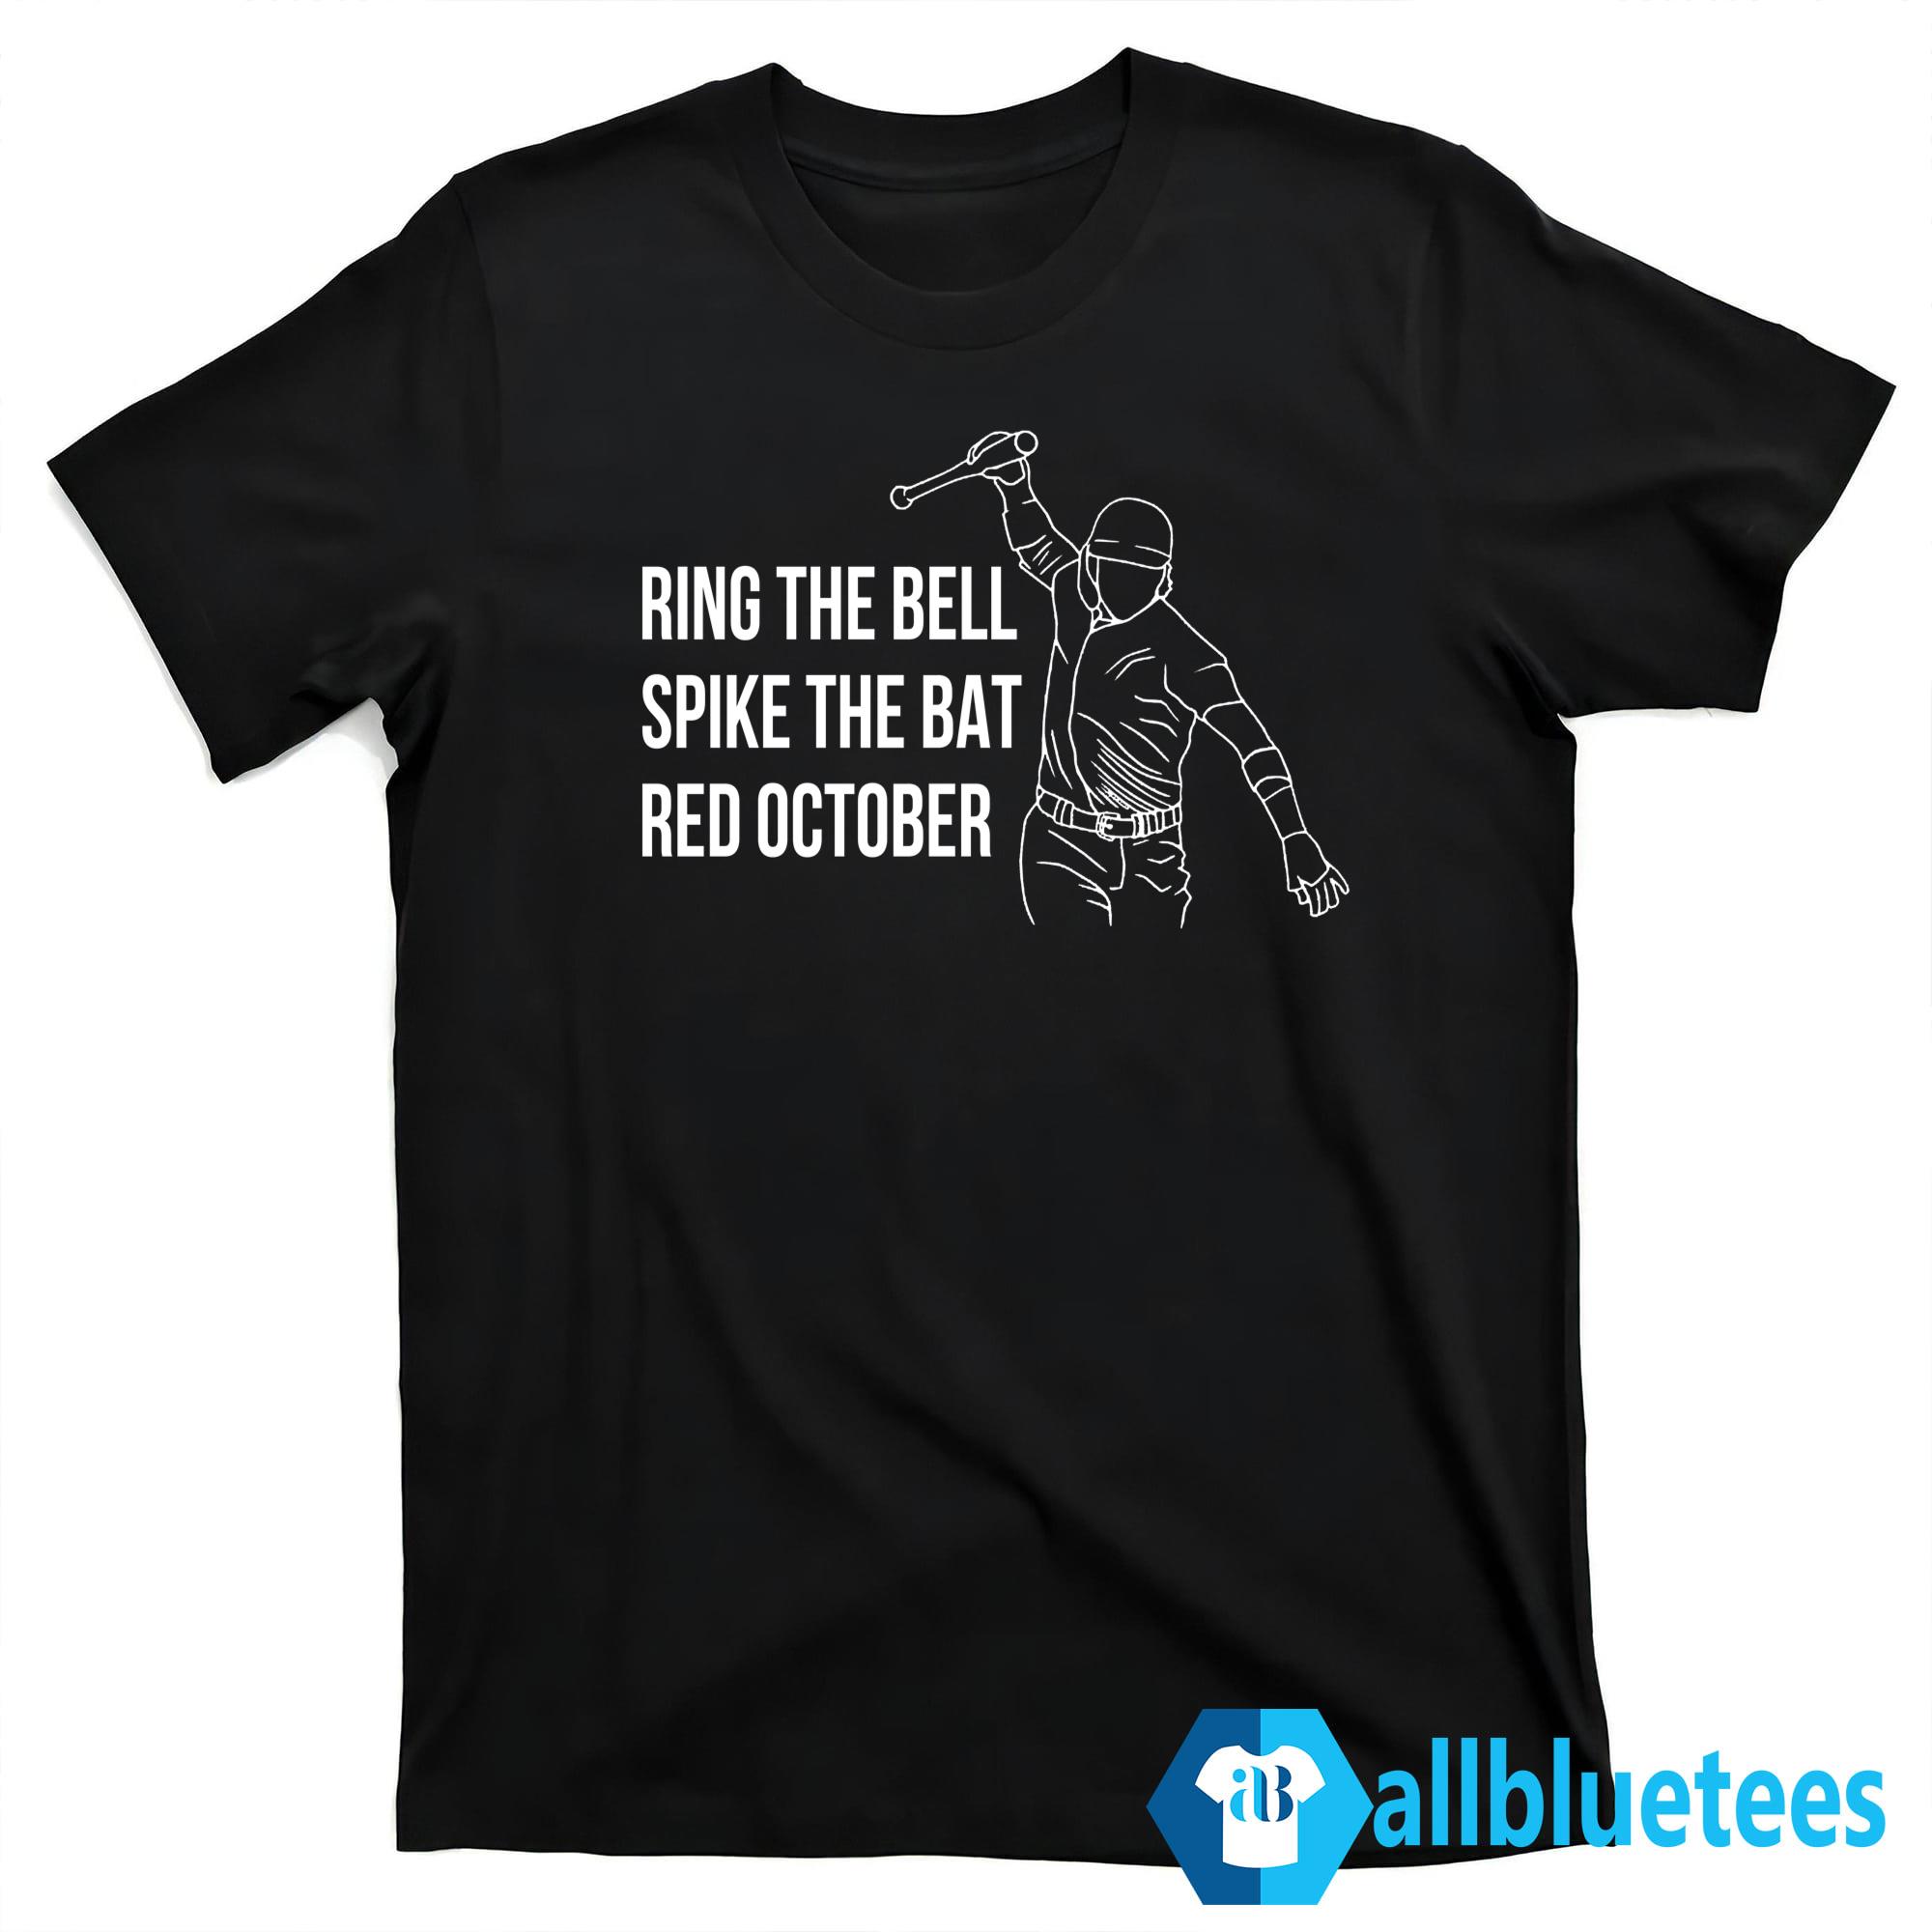 Ring The Bell Spike The Bat Red October T-Shirt | Allbluetees.com